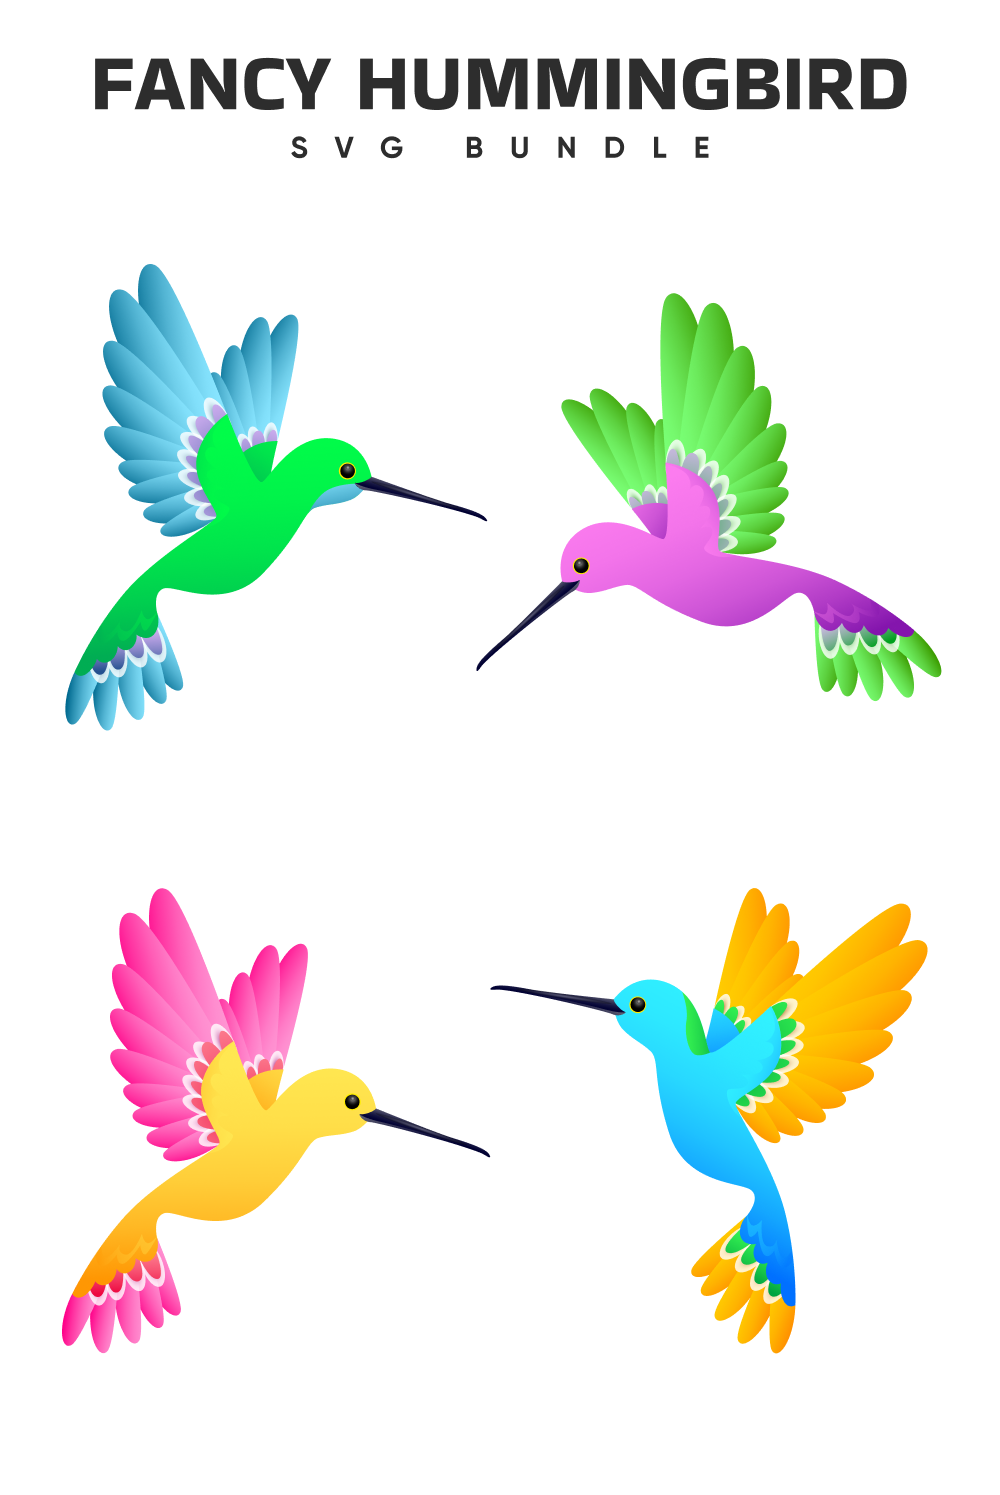 Group of colorful birds flying through the air.